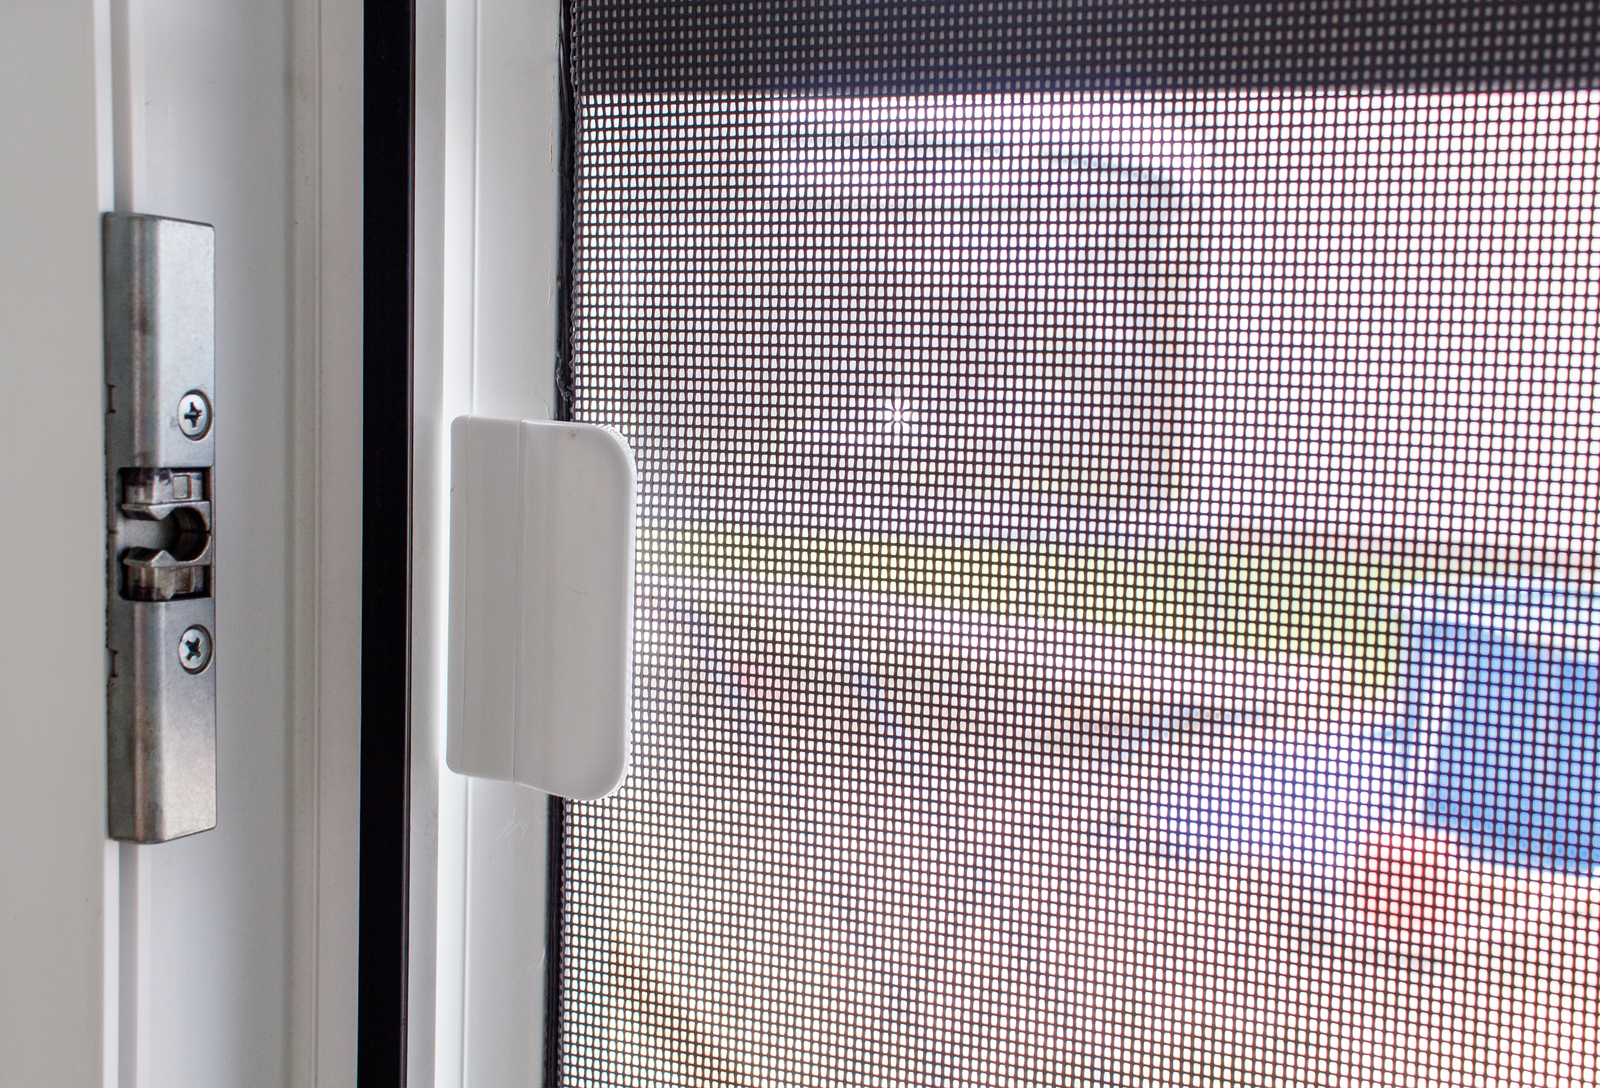 How to Fix a Small Hole in Your Window Screen